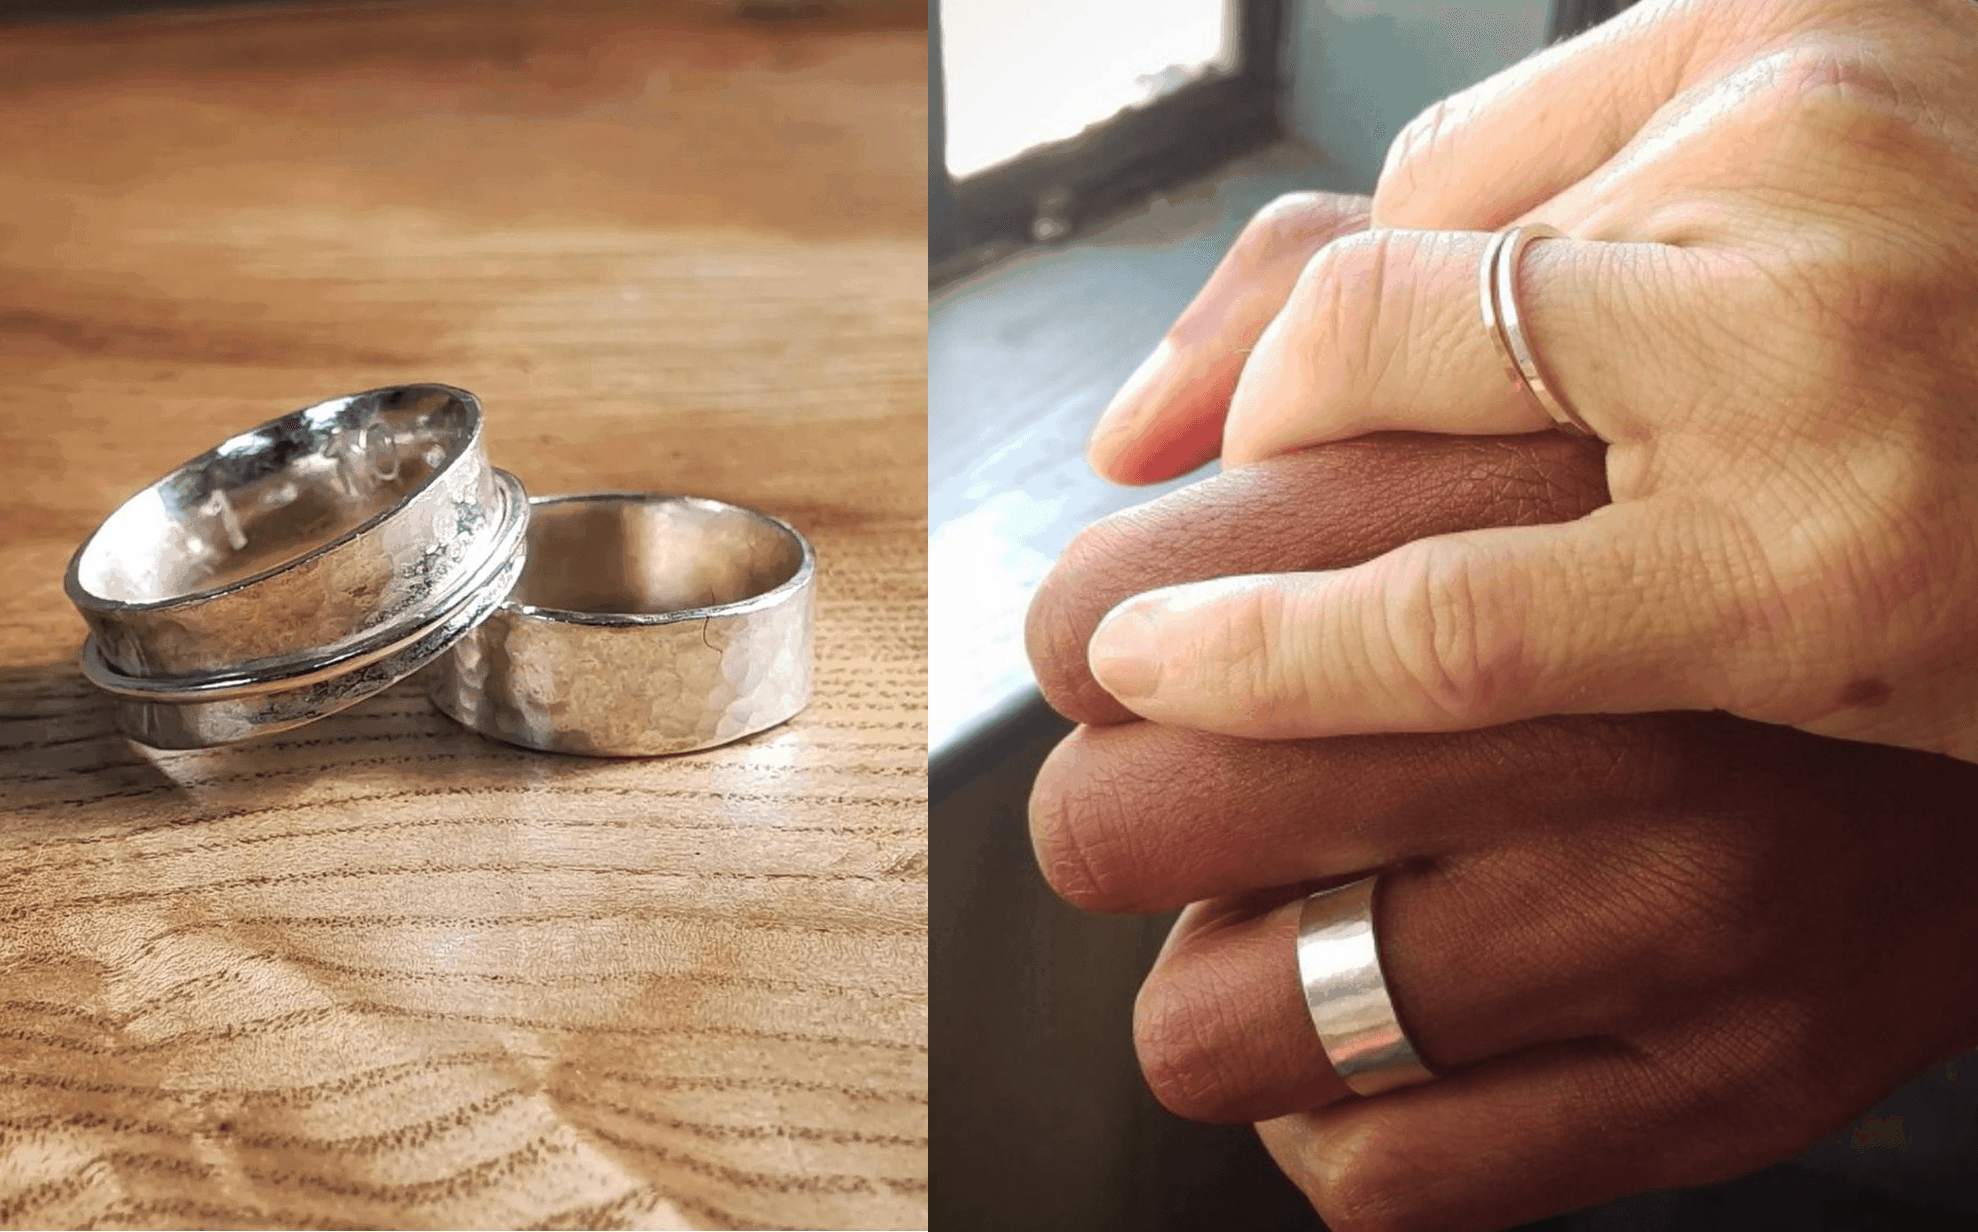 On the left, a stack of silver rings. On the right, two hand with silver bands.